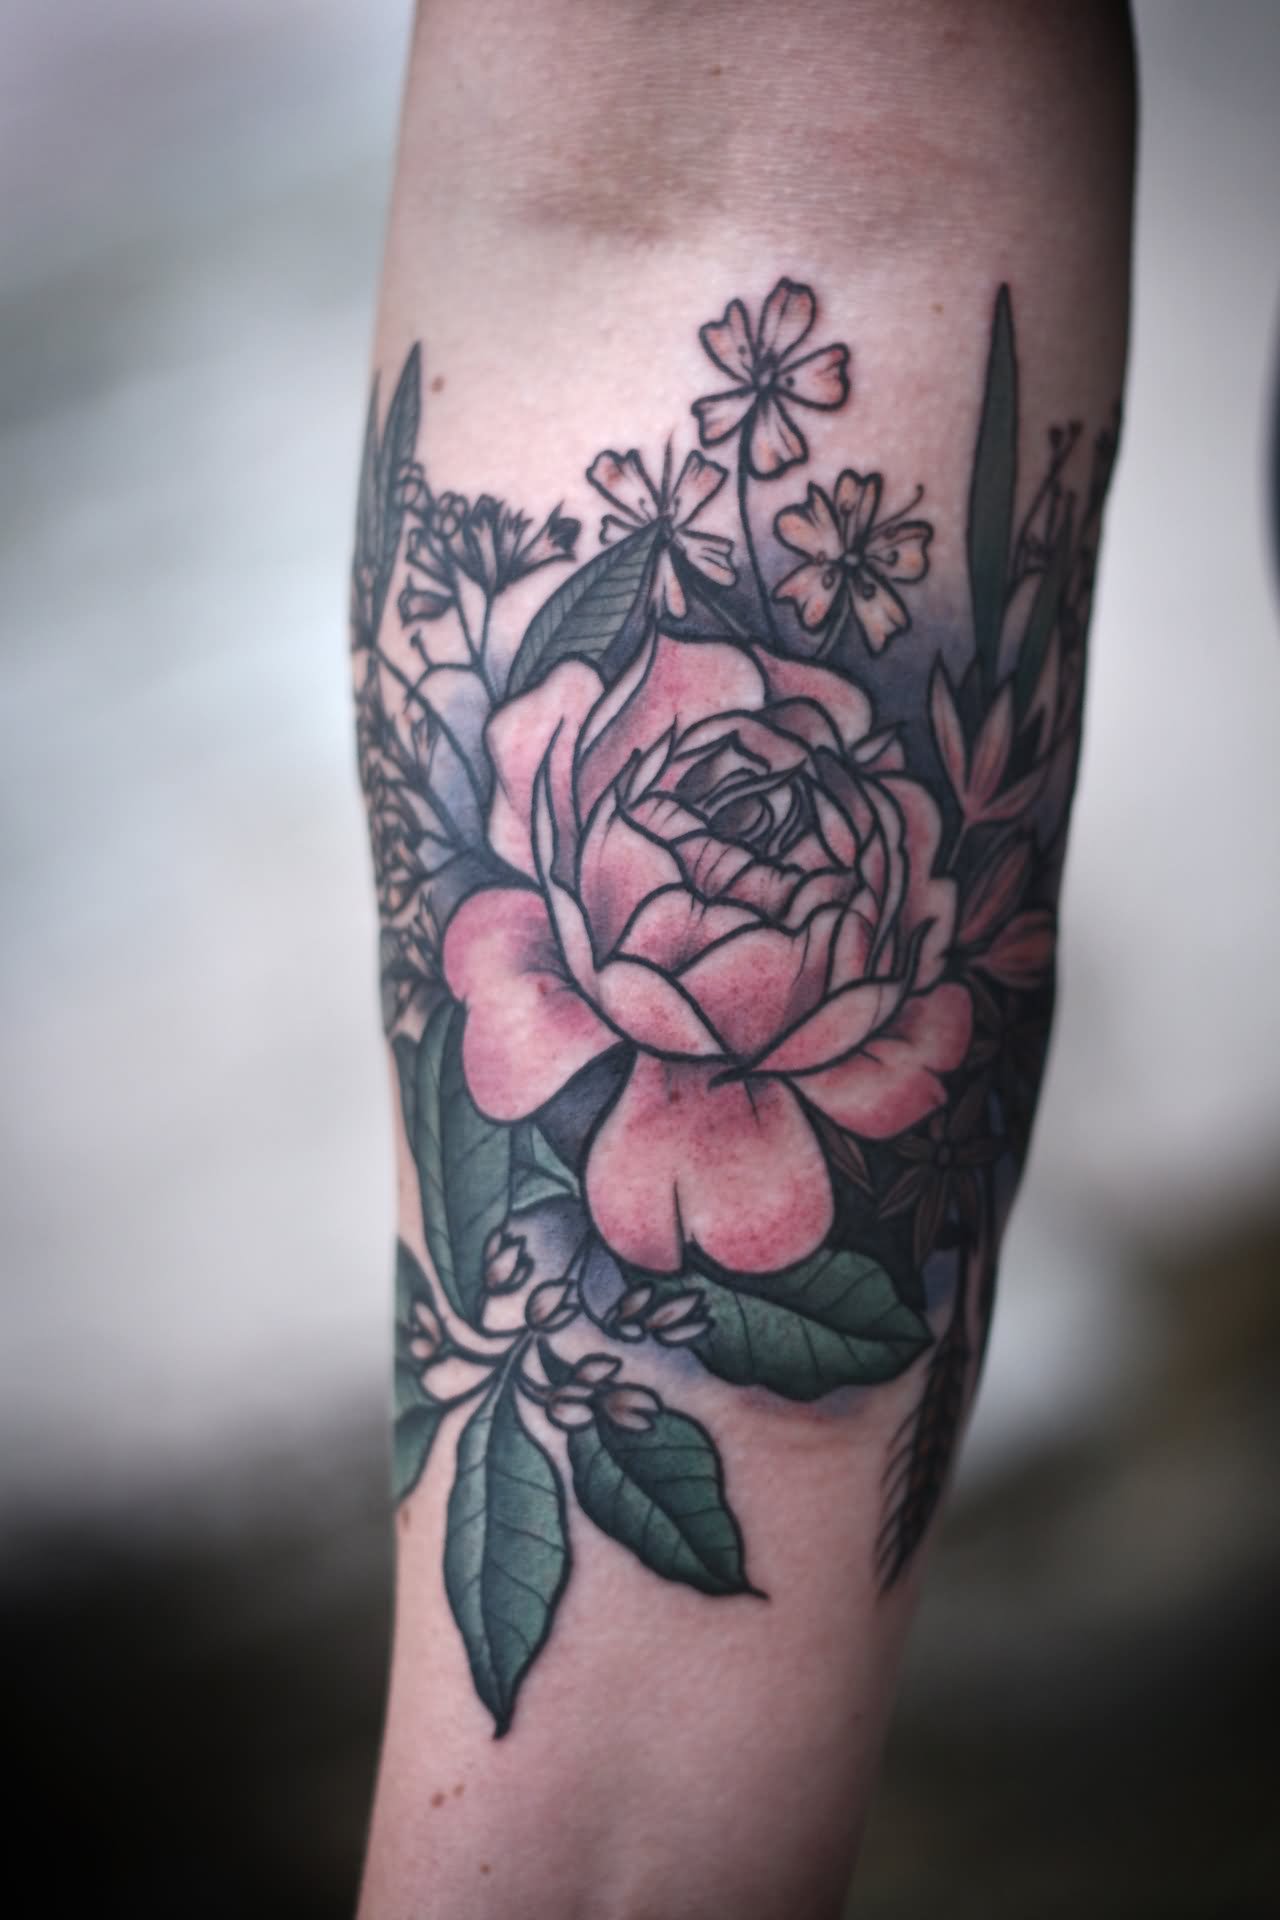 Amazing Floral Tattoo On Forearm By Alice Carrier